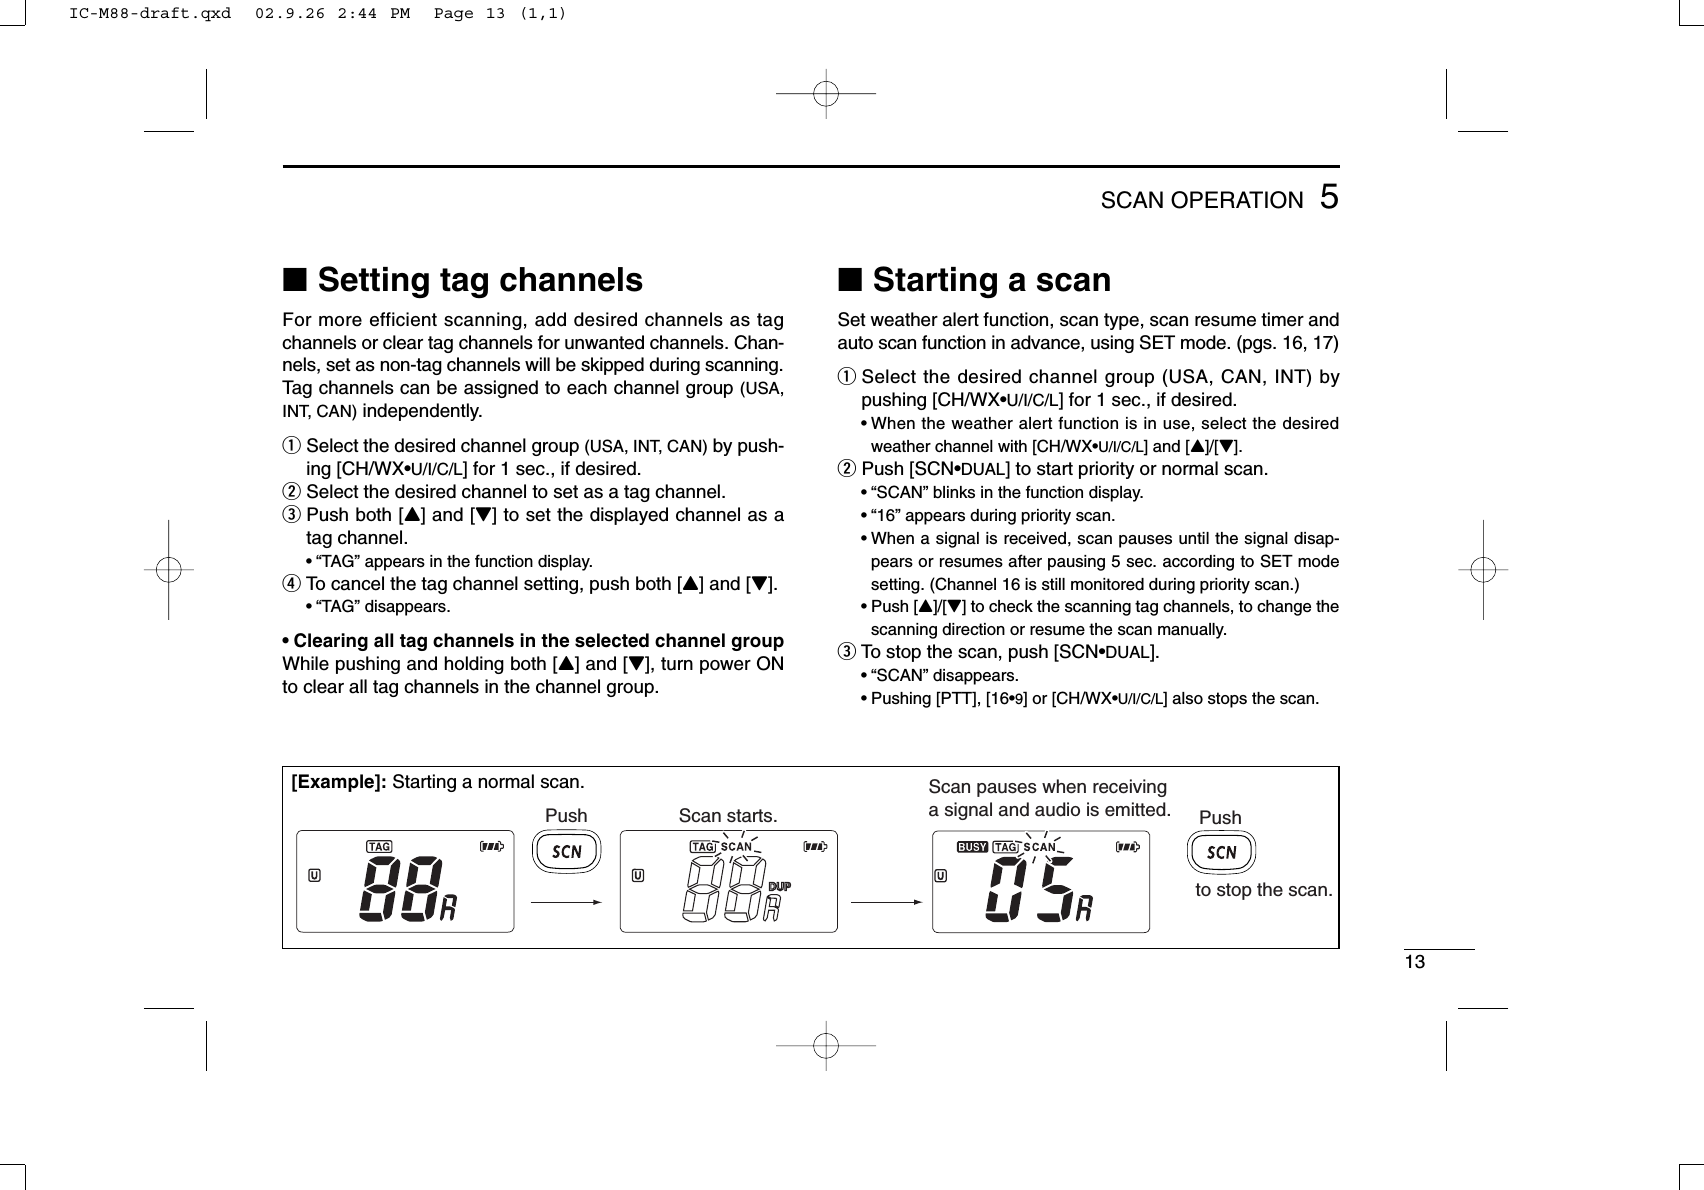 135SCAN OPERATION■Setting tag channelsFor more efficient scanning, add desired channels as tagchannels or clear tag channels for unwanted channels. Chan-nels, set as non-tag channels will be skipped during scanning.Tag channels can be assigned to each channel group (USA,INT, CAN) independently.qSelect the desired channel group (USA, INT, CAN) by push-ing [CH/WX•U/I/C/L] for 1 sec., if desired.wSelect the desired channel to set as a tag channel.ePush both [Y] and [Z] to set the displayed channel as atag channel.•“TAG” appears in the function display.rTo cancel the tag channel setting, push both [Y] and [Z].•“TAG” disappears.• Clearing all tag channels in the selected channel groupWhile pushing and holding both [Y] and [Z], turn power ONto clear all tag channels in the channel group.■Starting a scanSet weather alert function, scan type, scan resume timer andauto scan function in advance, using SET mode. (pgs. 16, 17)qSelect the desired channel group (USA, CAN, INT) bypushing [CH/WX•U/I/C/L] for 1 sec., if desired.•When the weather alert function is in use, select the desiredweather channel with [CH/WX•U/I/C/L] and [Y]/[Z].wPush [SCN•DUAL] to start priority or normal scan.•“SCAN” blinks in the function display.•“16” appears during priority scan.•When a signal is received, scan pauses until the signal disap-pears or resumes after pausing 5 sec. according to SET modesetting. (Channel 16 is still monitored during priority scan.)•Push [Y]/[Z] to check the scanning tag channels, to change thescanning direction or resume the scan manually.eTo stop the scan, push [SCN•DUAL].•“SCAN” disappears.•Pushing [PTT], [16•9] or [CH/WX•U/I/C/L] also stops the scan.Push Scan starts.Scan pauses when receiving a signal and audio is emitted. Pushto stop the scan.[Example]: Starting a normal scan.IC-M88-draft.qxd  02.9.26 2:44 PM  Page 13 (1,1)